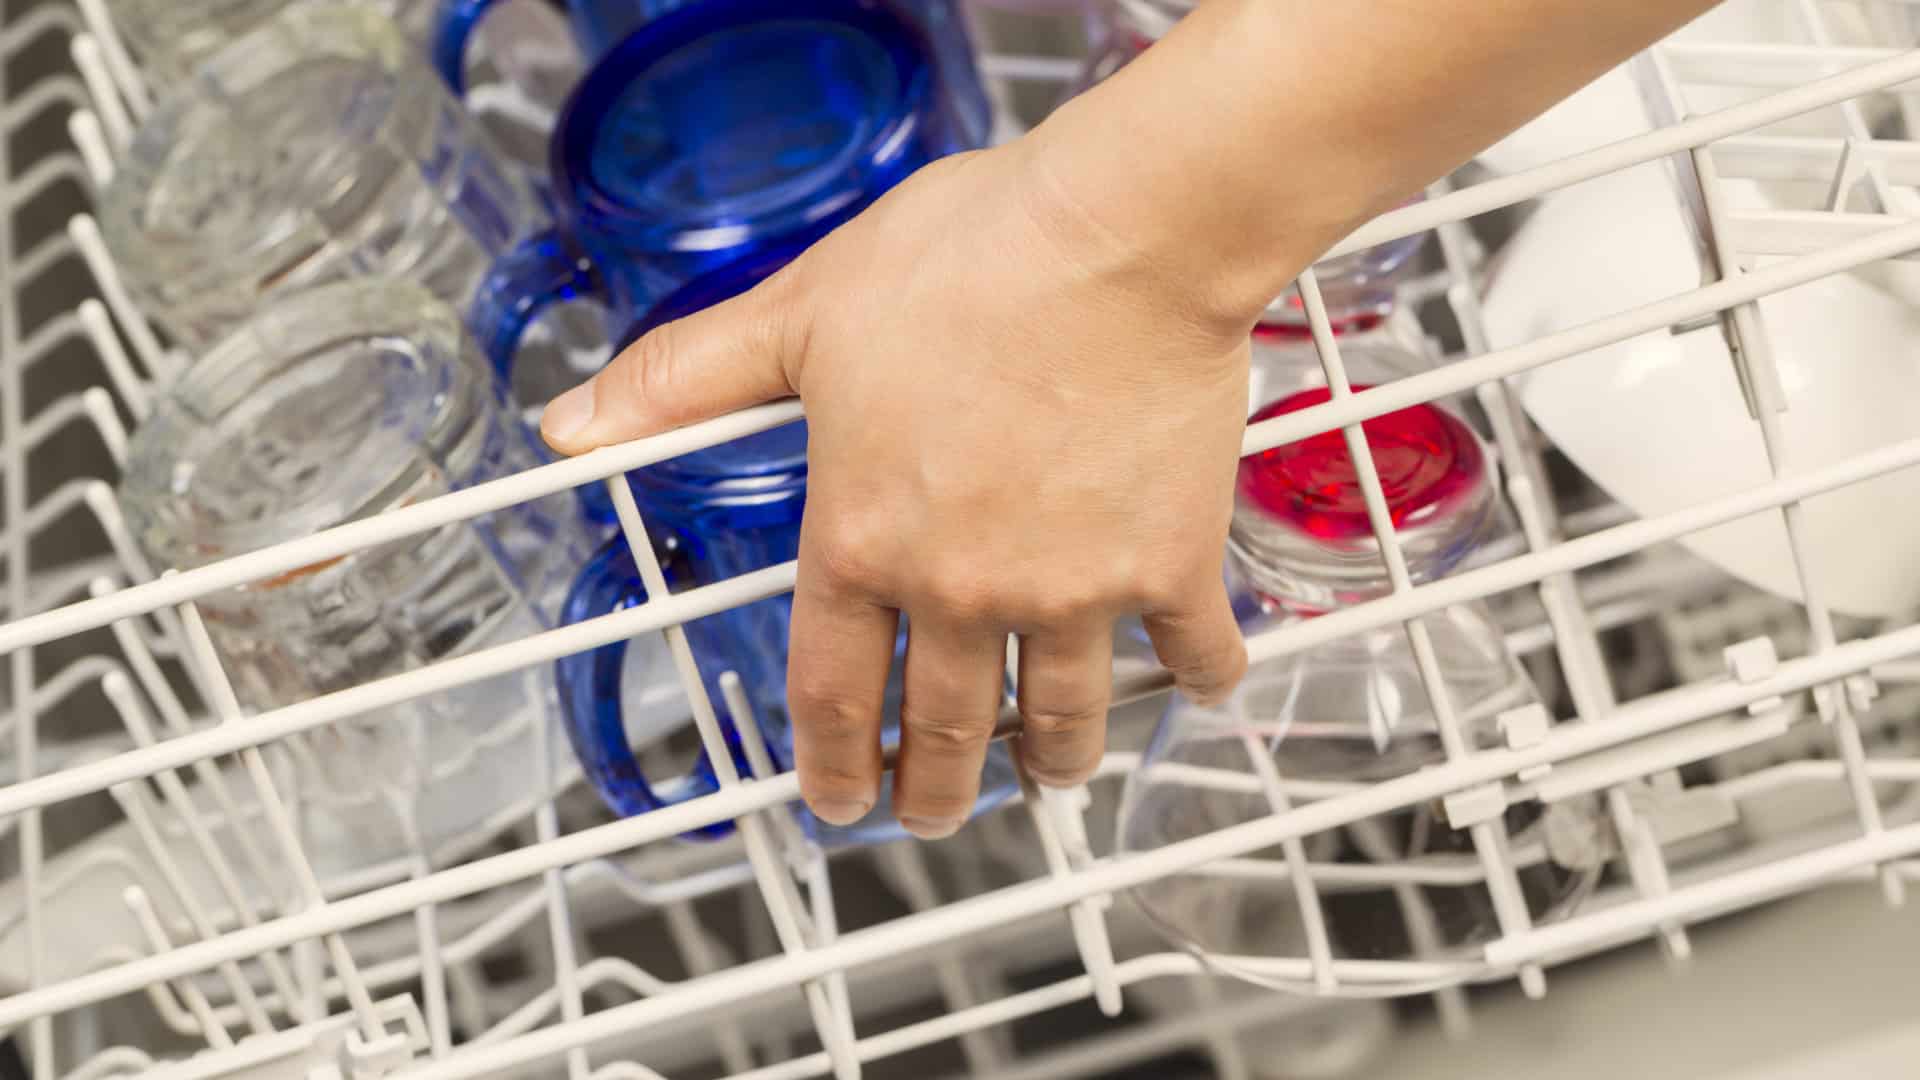 Featured image for “Amana Dishwasher Not Drying Properly: How To Fix It”